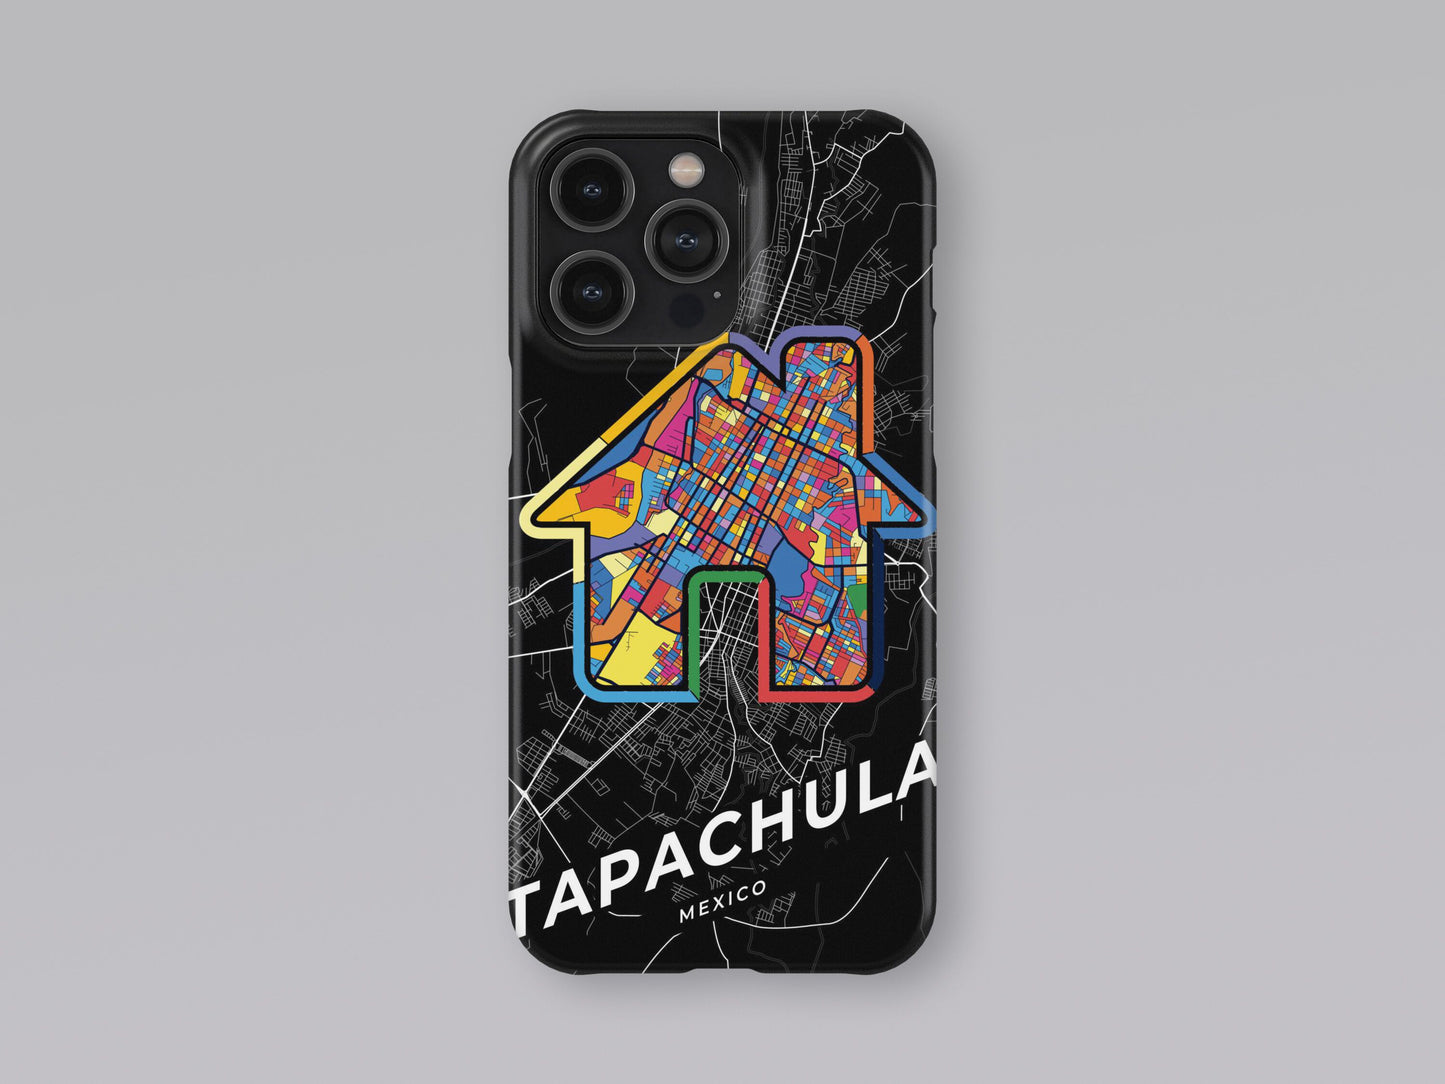 Tapachula Mexico slim phone case with colorful icon 3